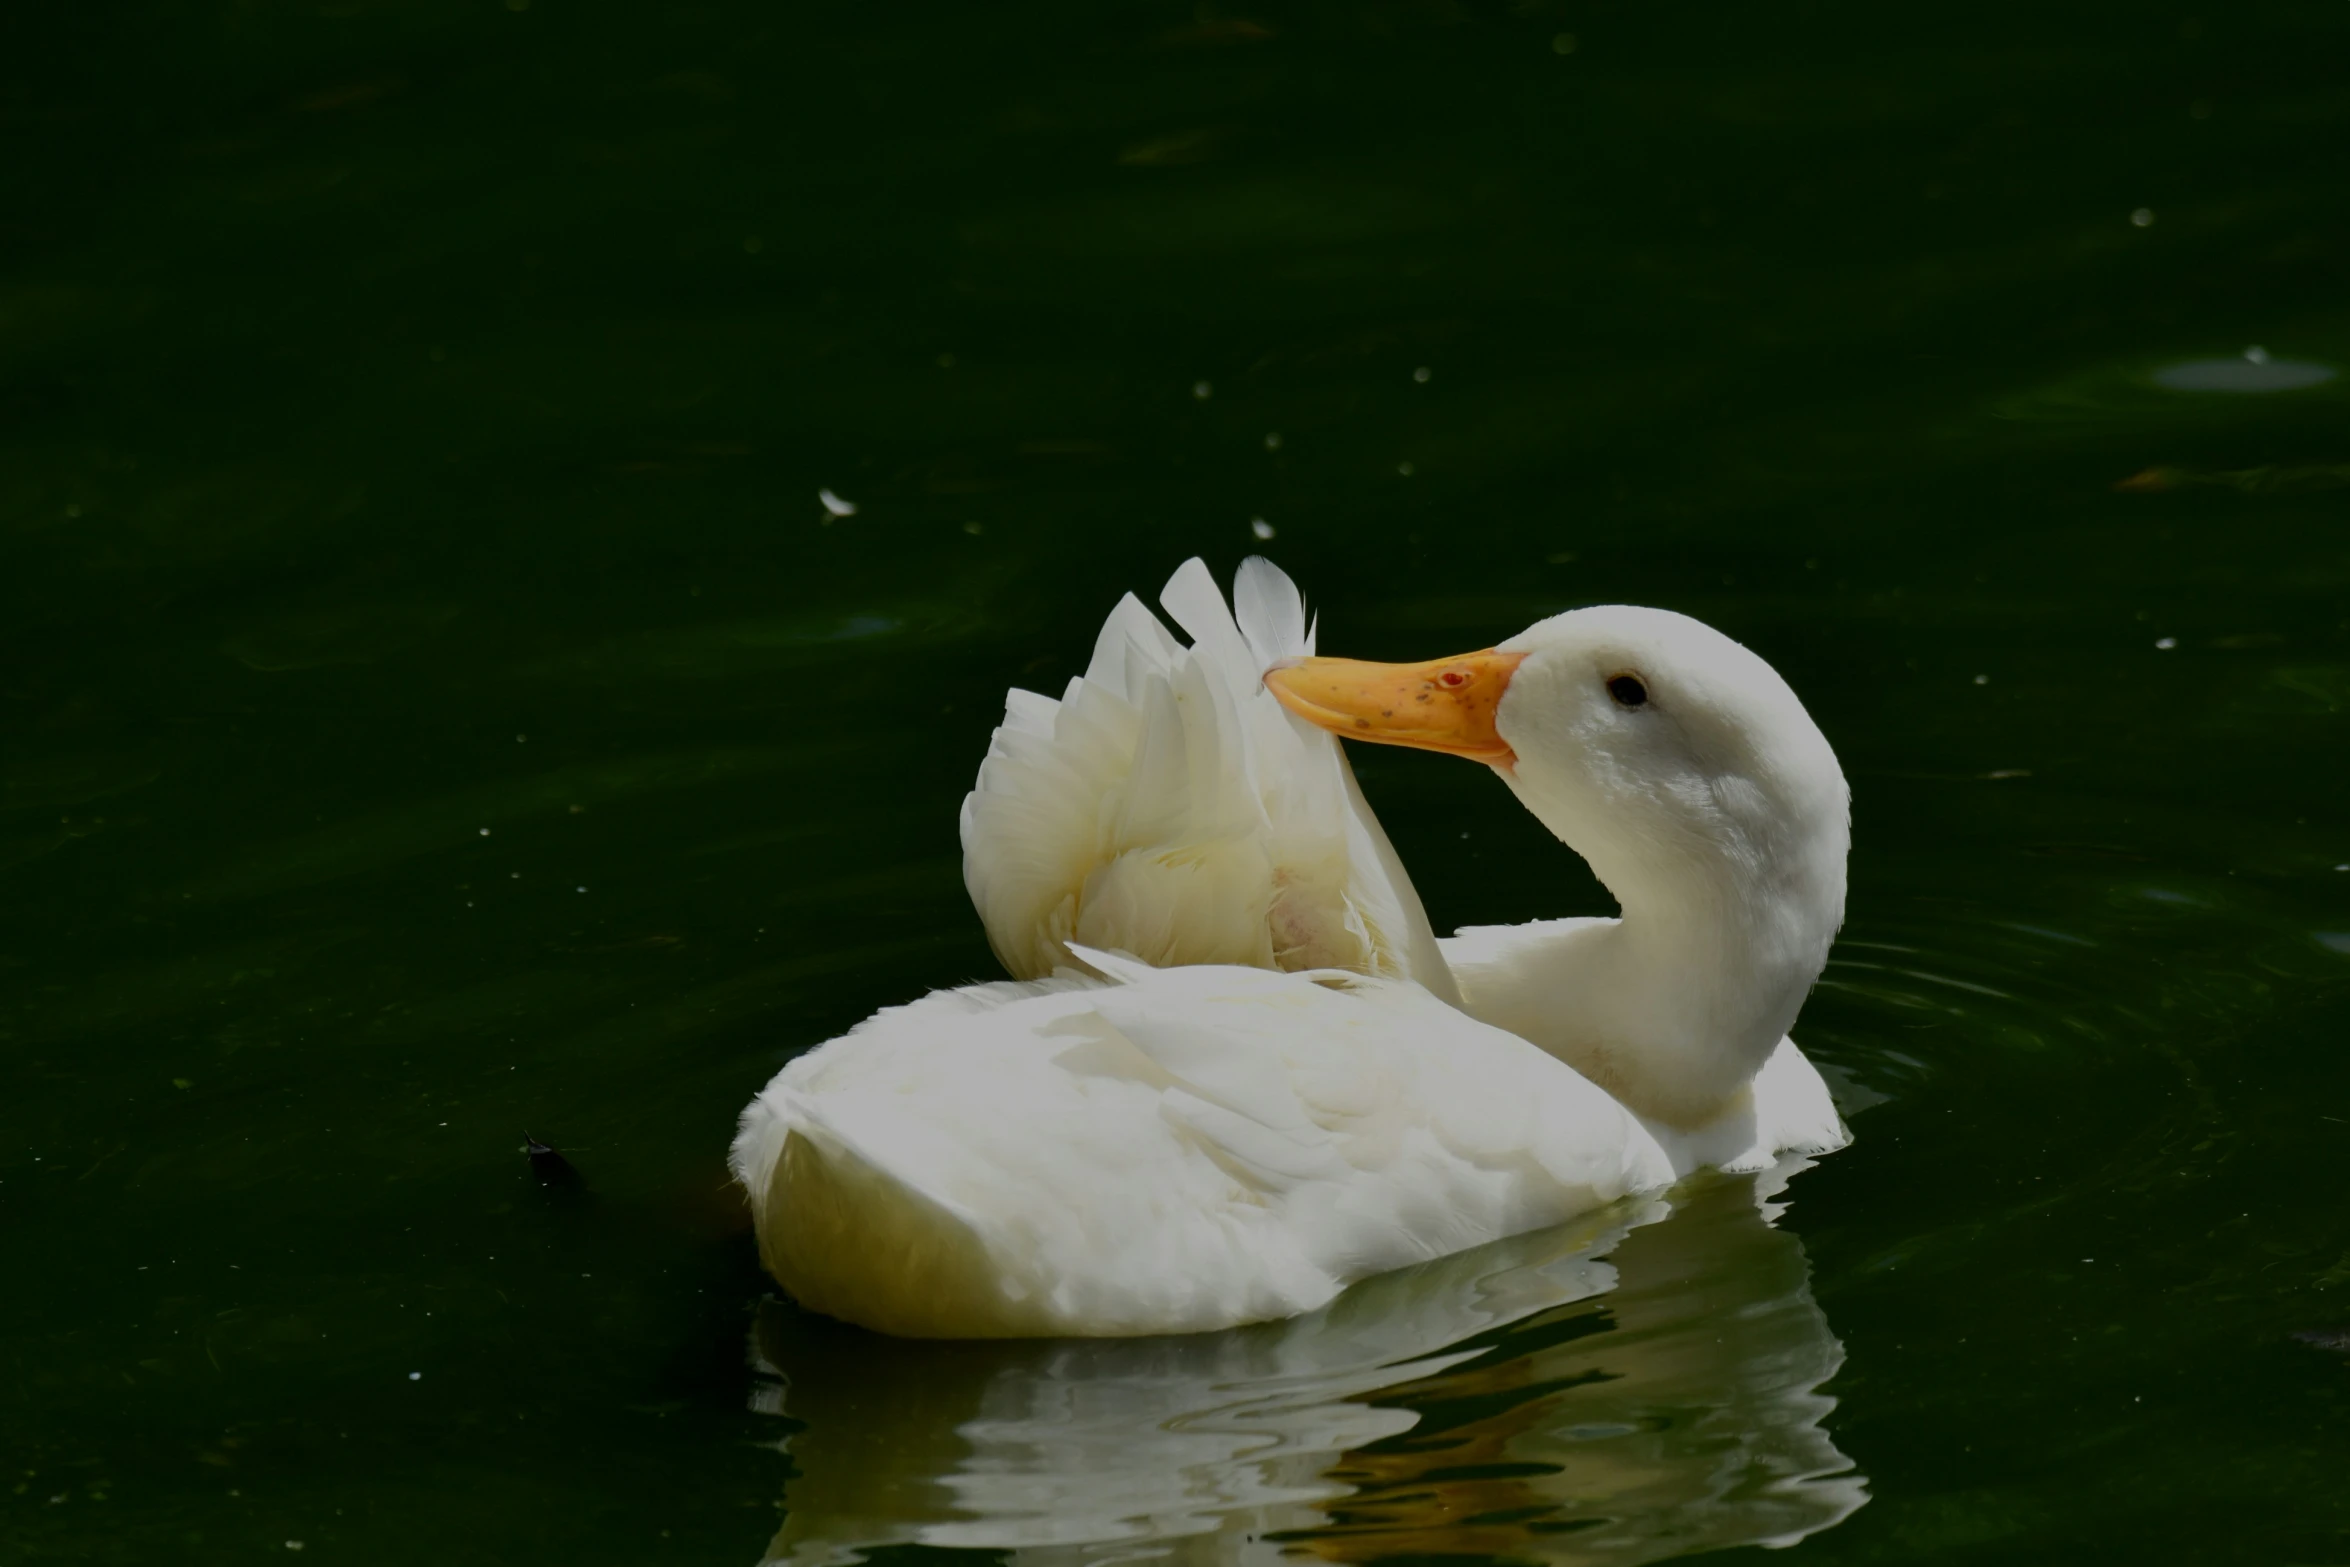 a duck swimming on top of a green body of water